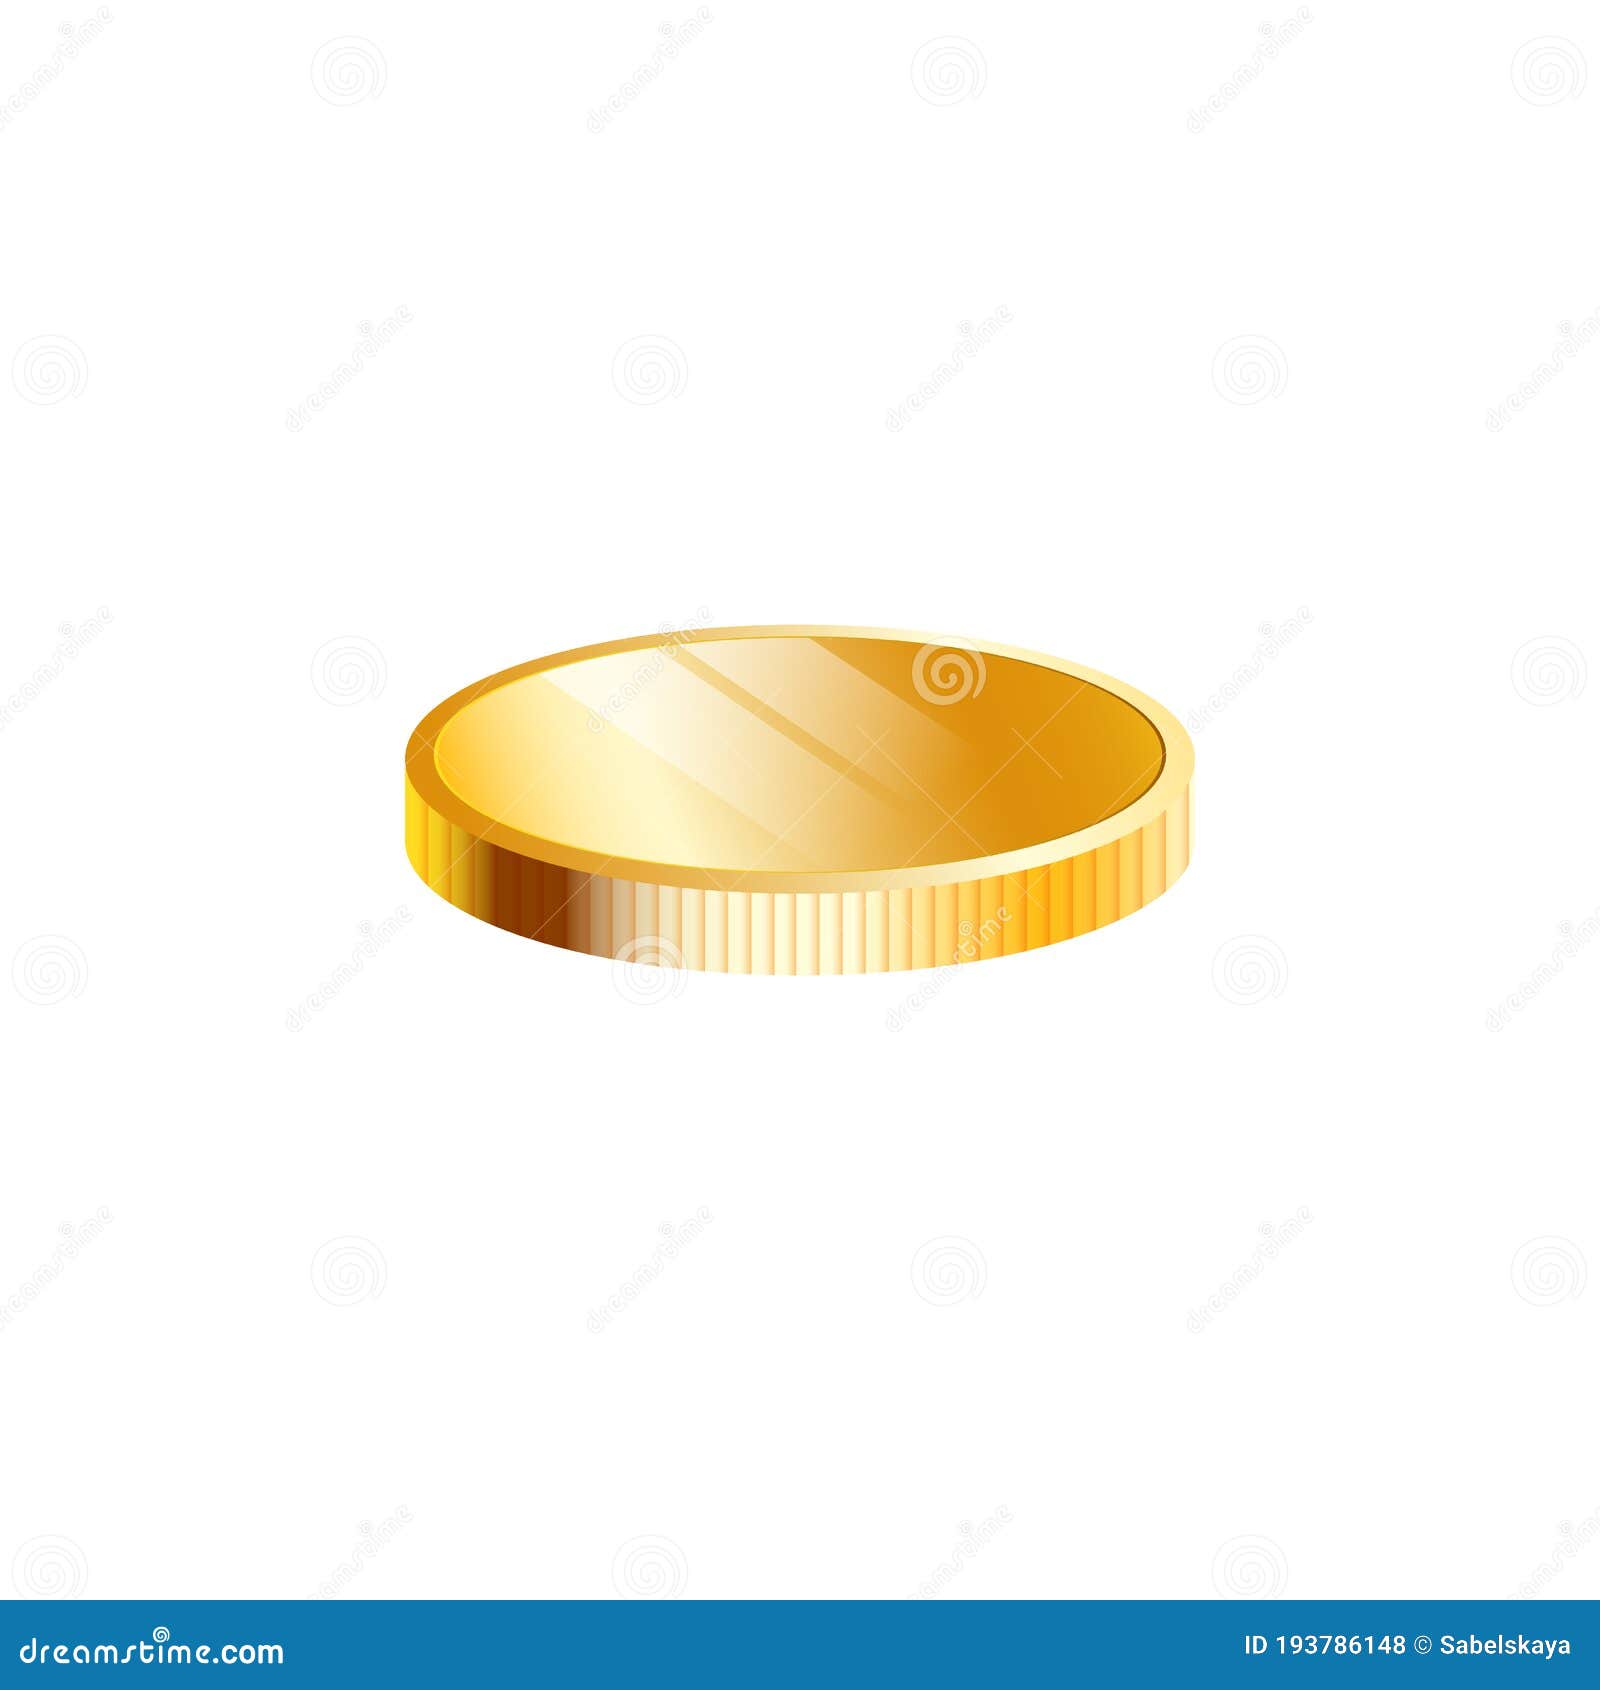 Gold Coin or Jackpot Lottery Piece Mockup Realistic Vector Illustration ...